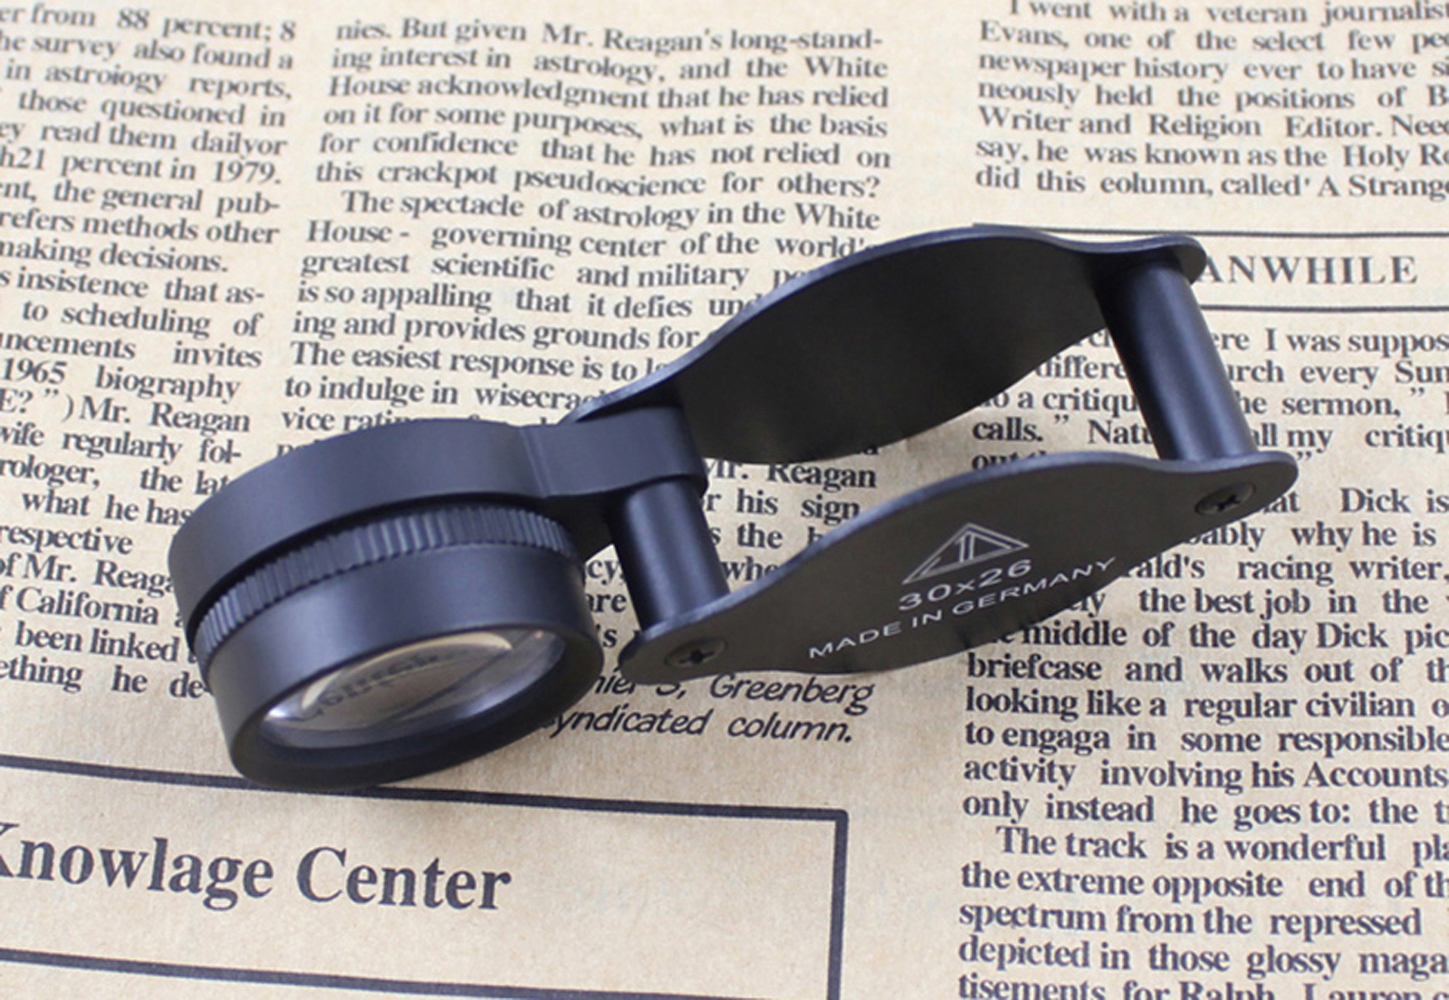 All Optical Zeiss Lens Jewelry Magnifier Metal Fold 30*26